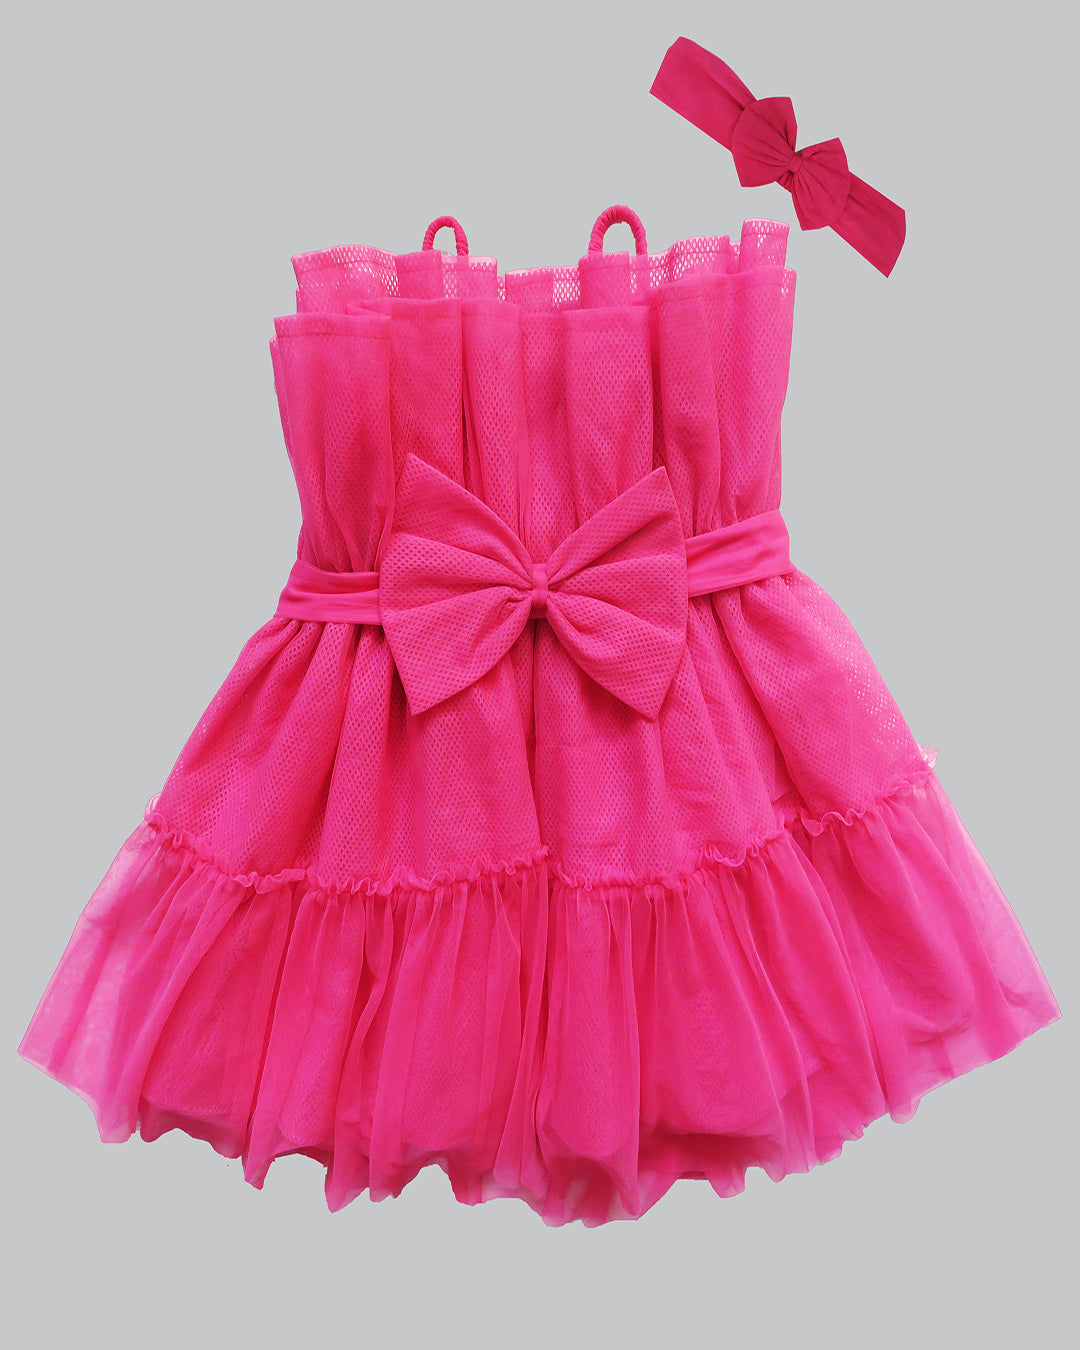 Rose Pink Frill Party Dress With Bow And Hairband